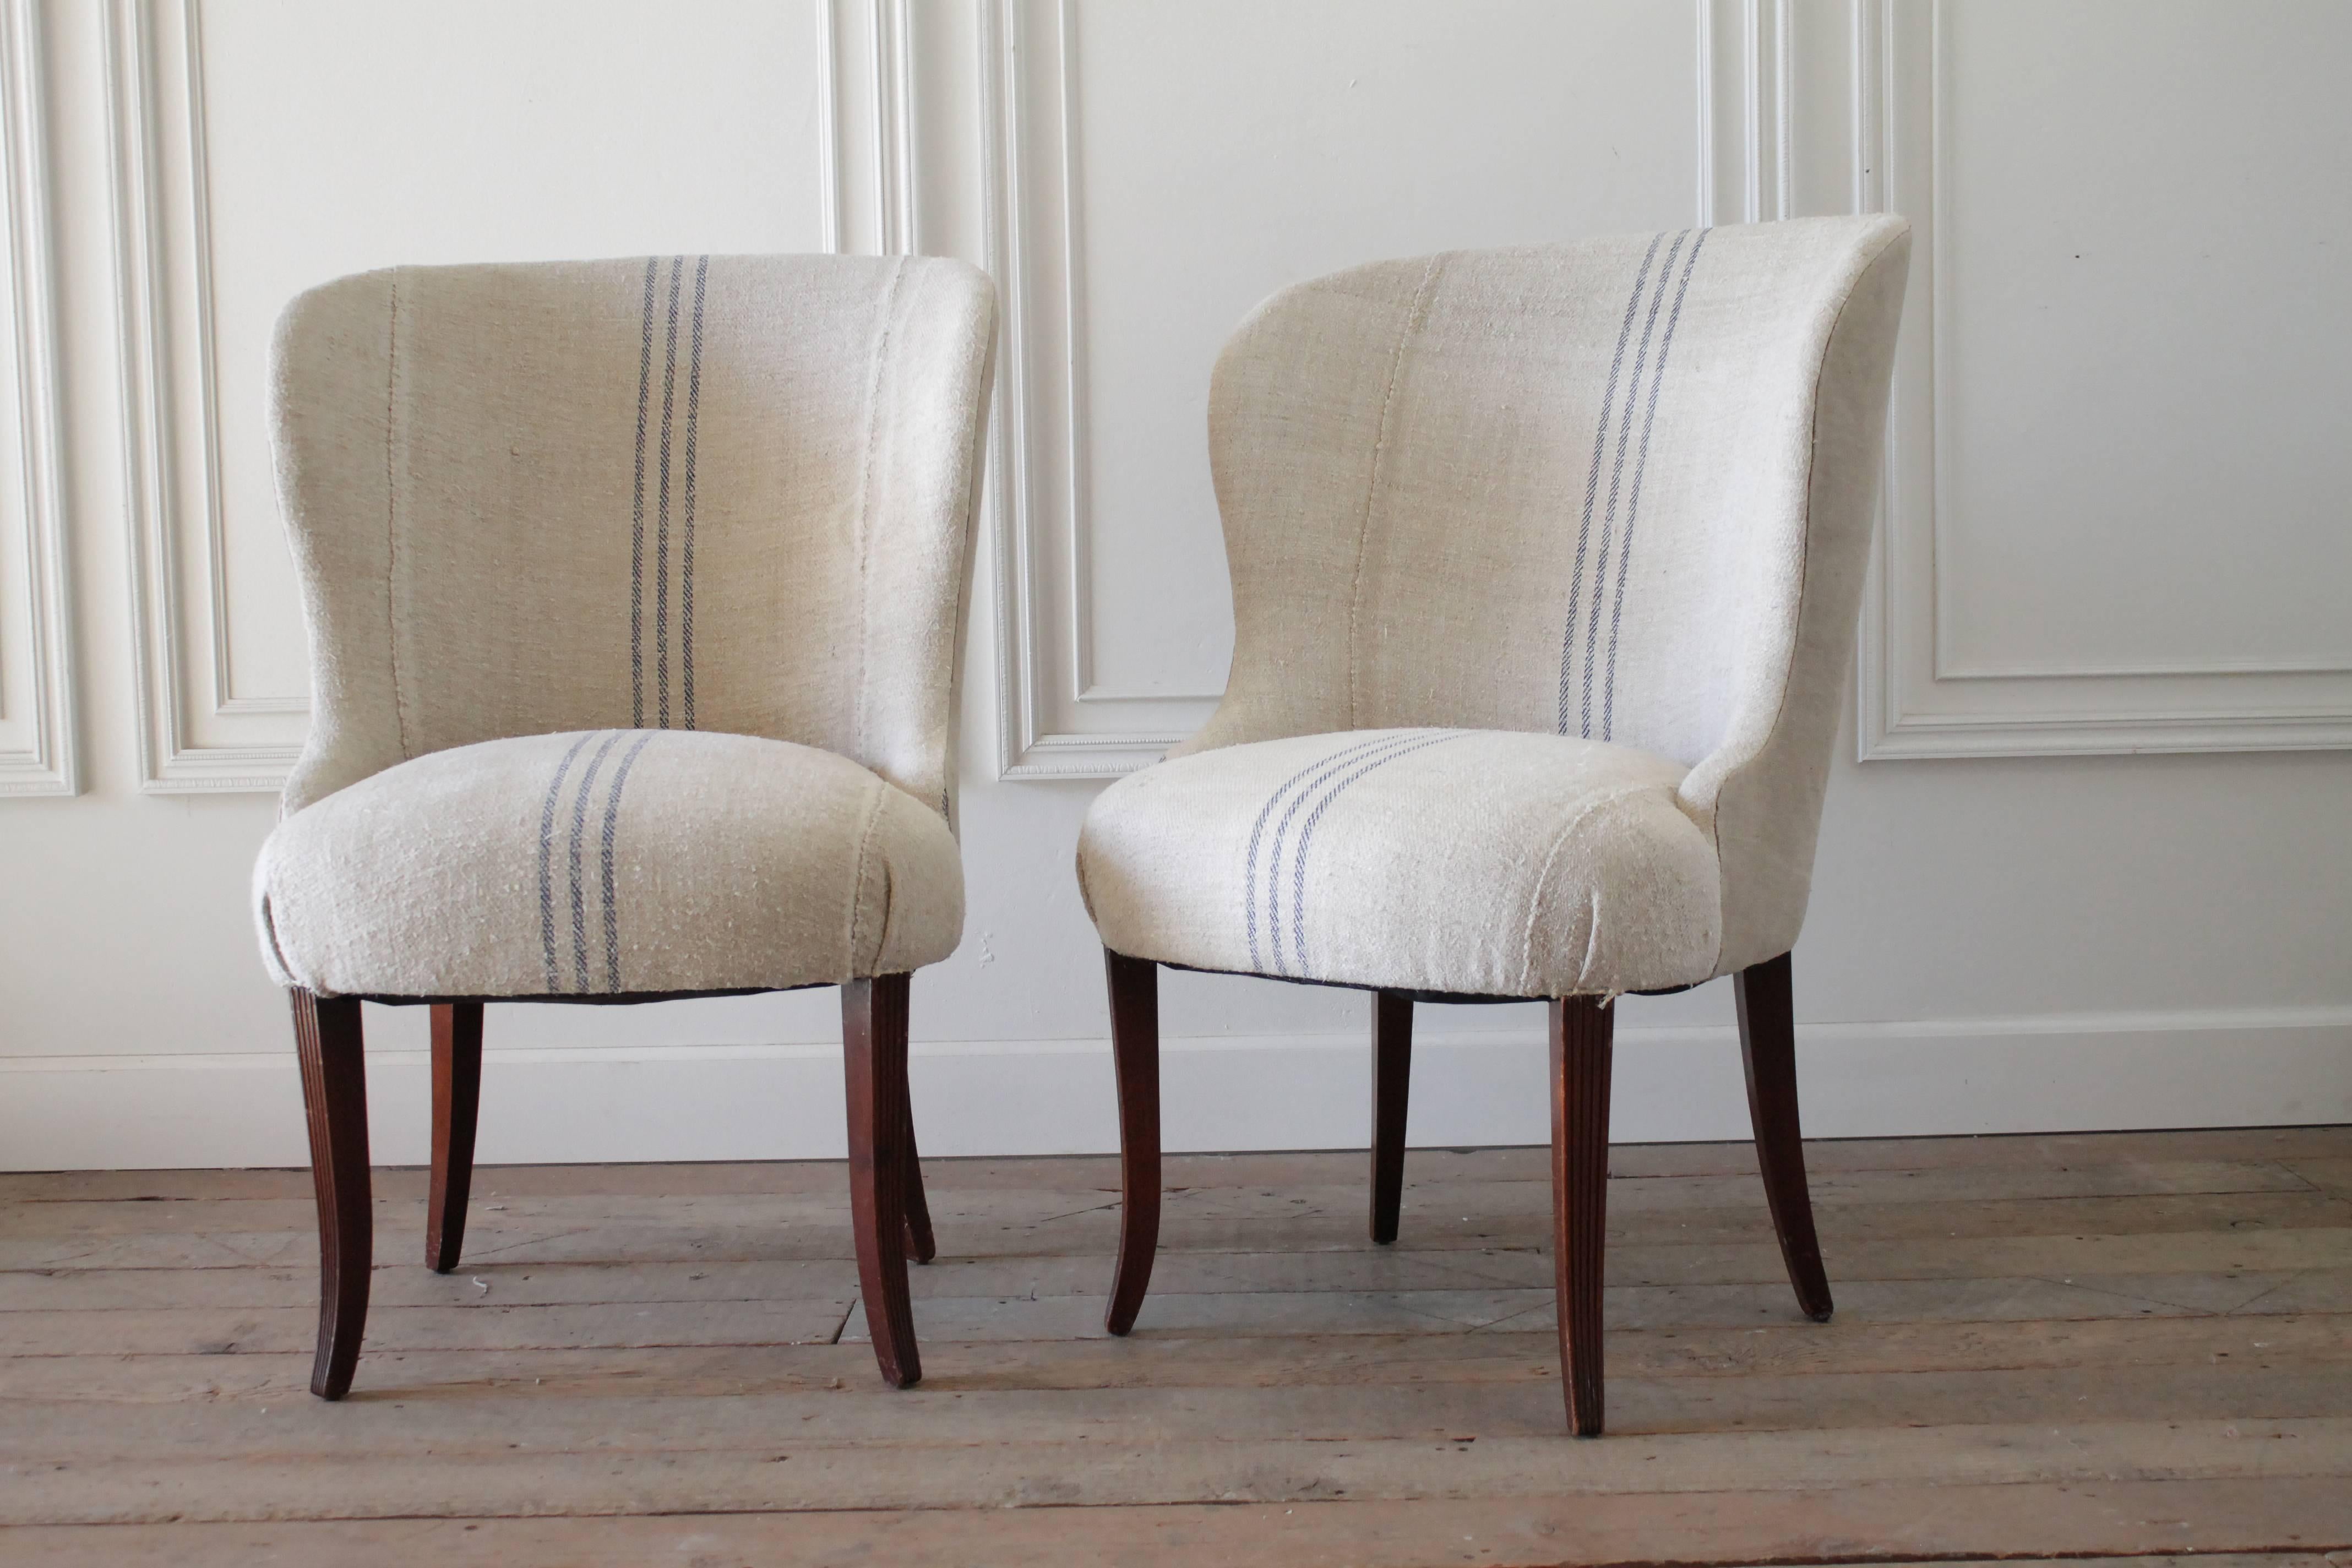 Stylish Ralph Lauren Wing chairs with solid wood legs, reupholstered in an antique French grainsack material. The grain sack we chose have a light oatmeal color background with a faded blue ticking stripe down the center. A very thick nubby texture